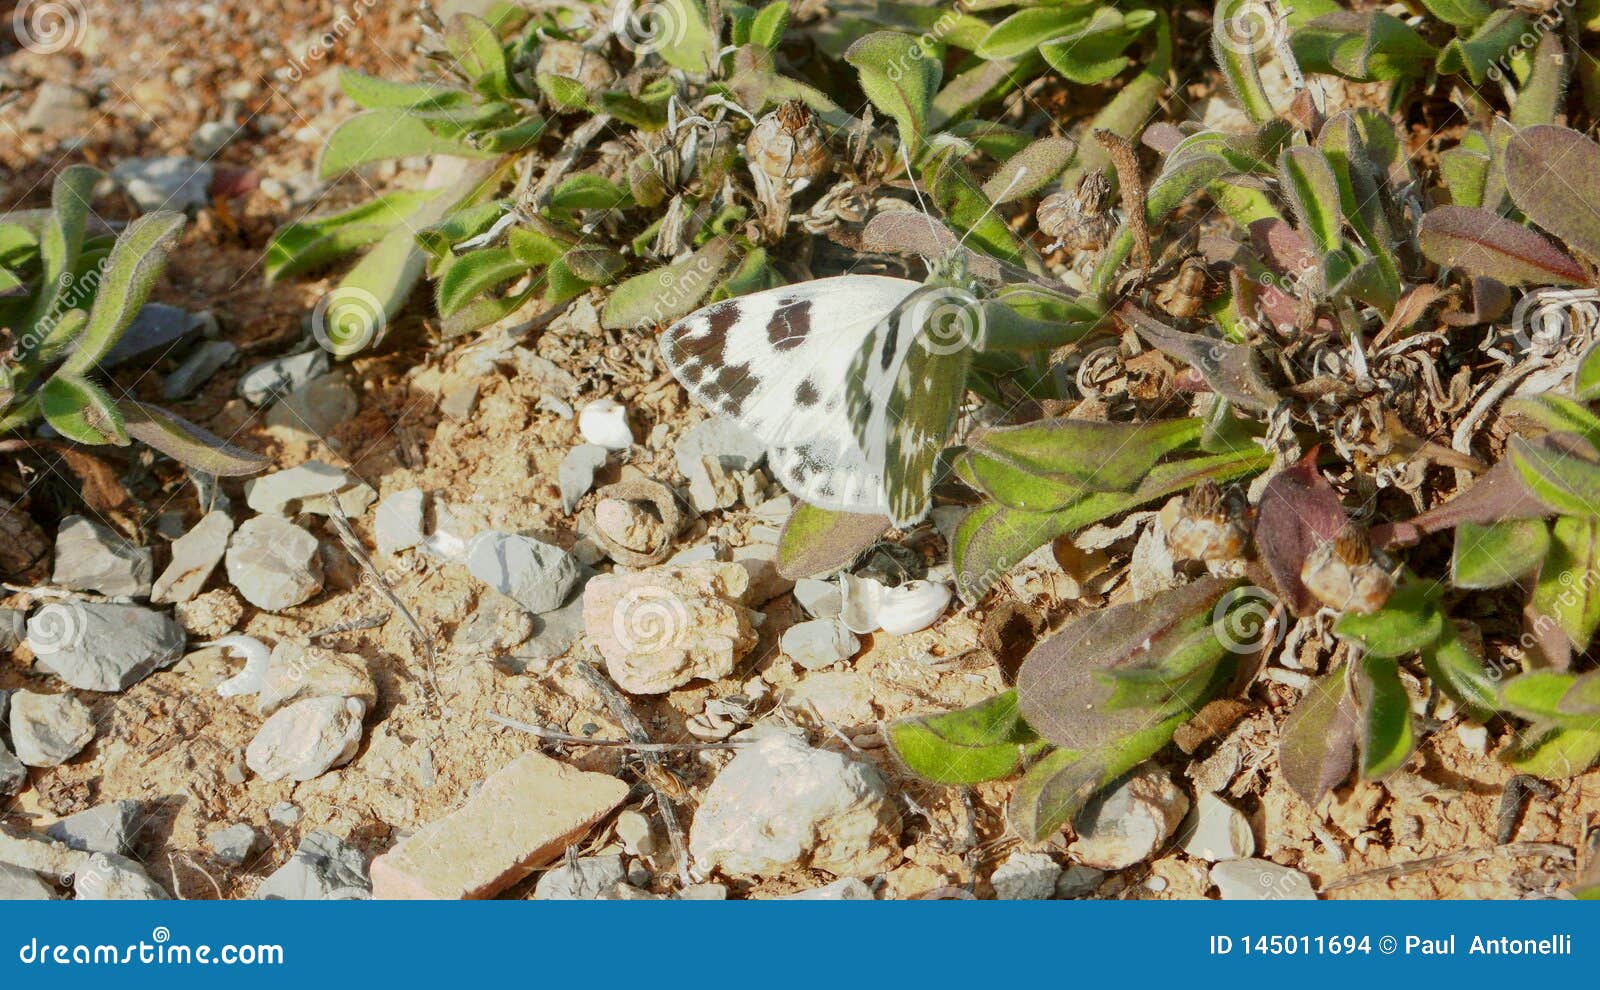 Cabbage White butterfly 2. A cabbage white butterfly in between a lot of small plants, on a dry, otherwise barren surface.